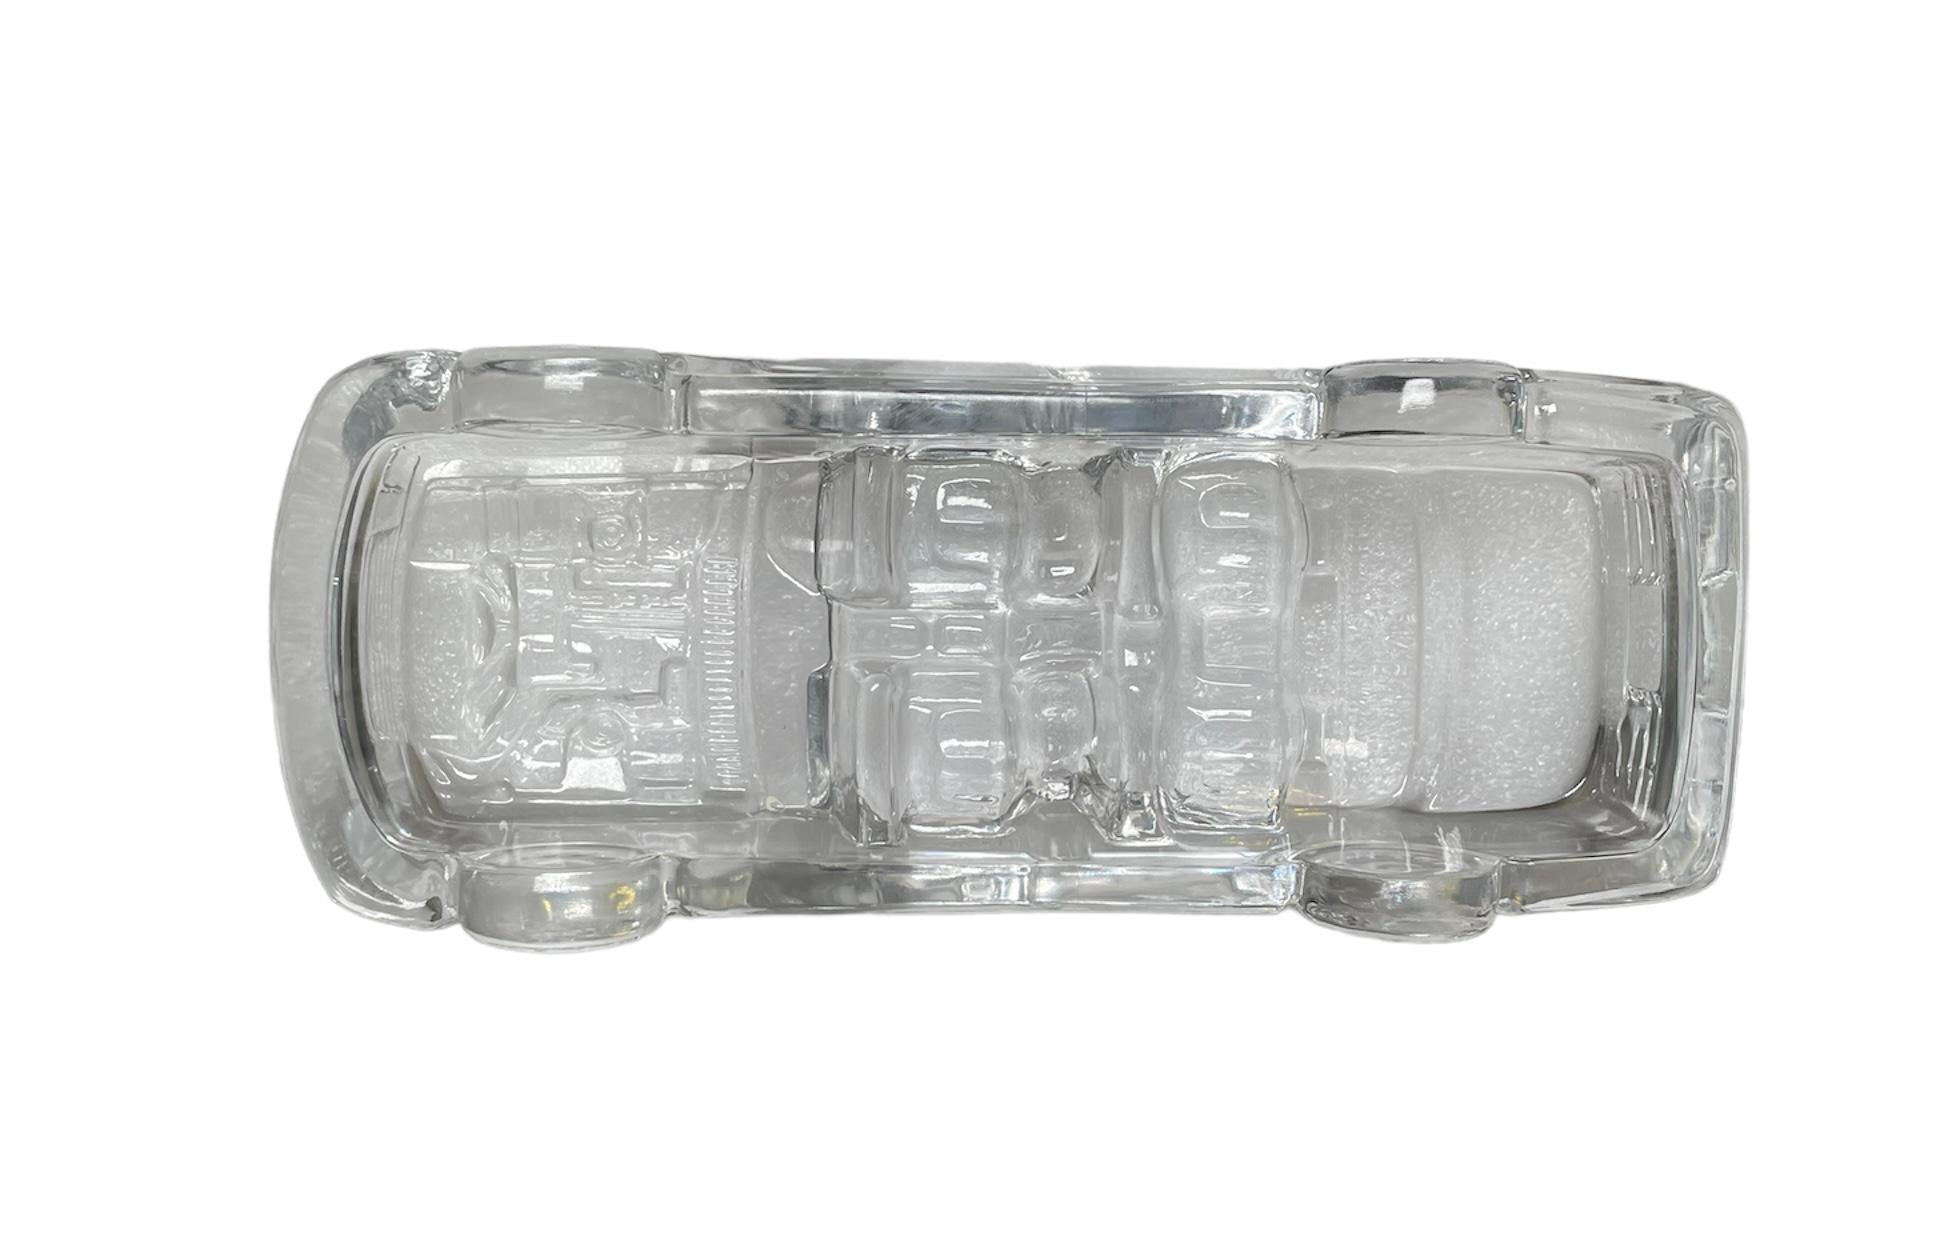 1989-90’s Clear Crystal Lexus LS 400 Car Paperweight In Good Condition For Sale In Guaynabo, PR